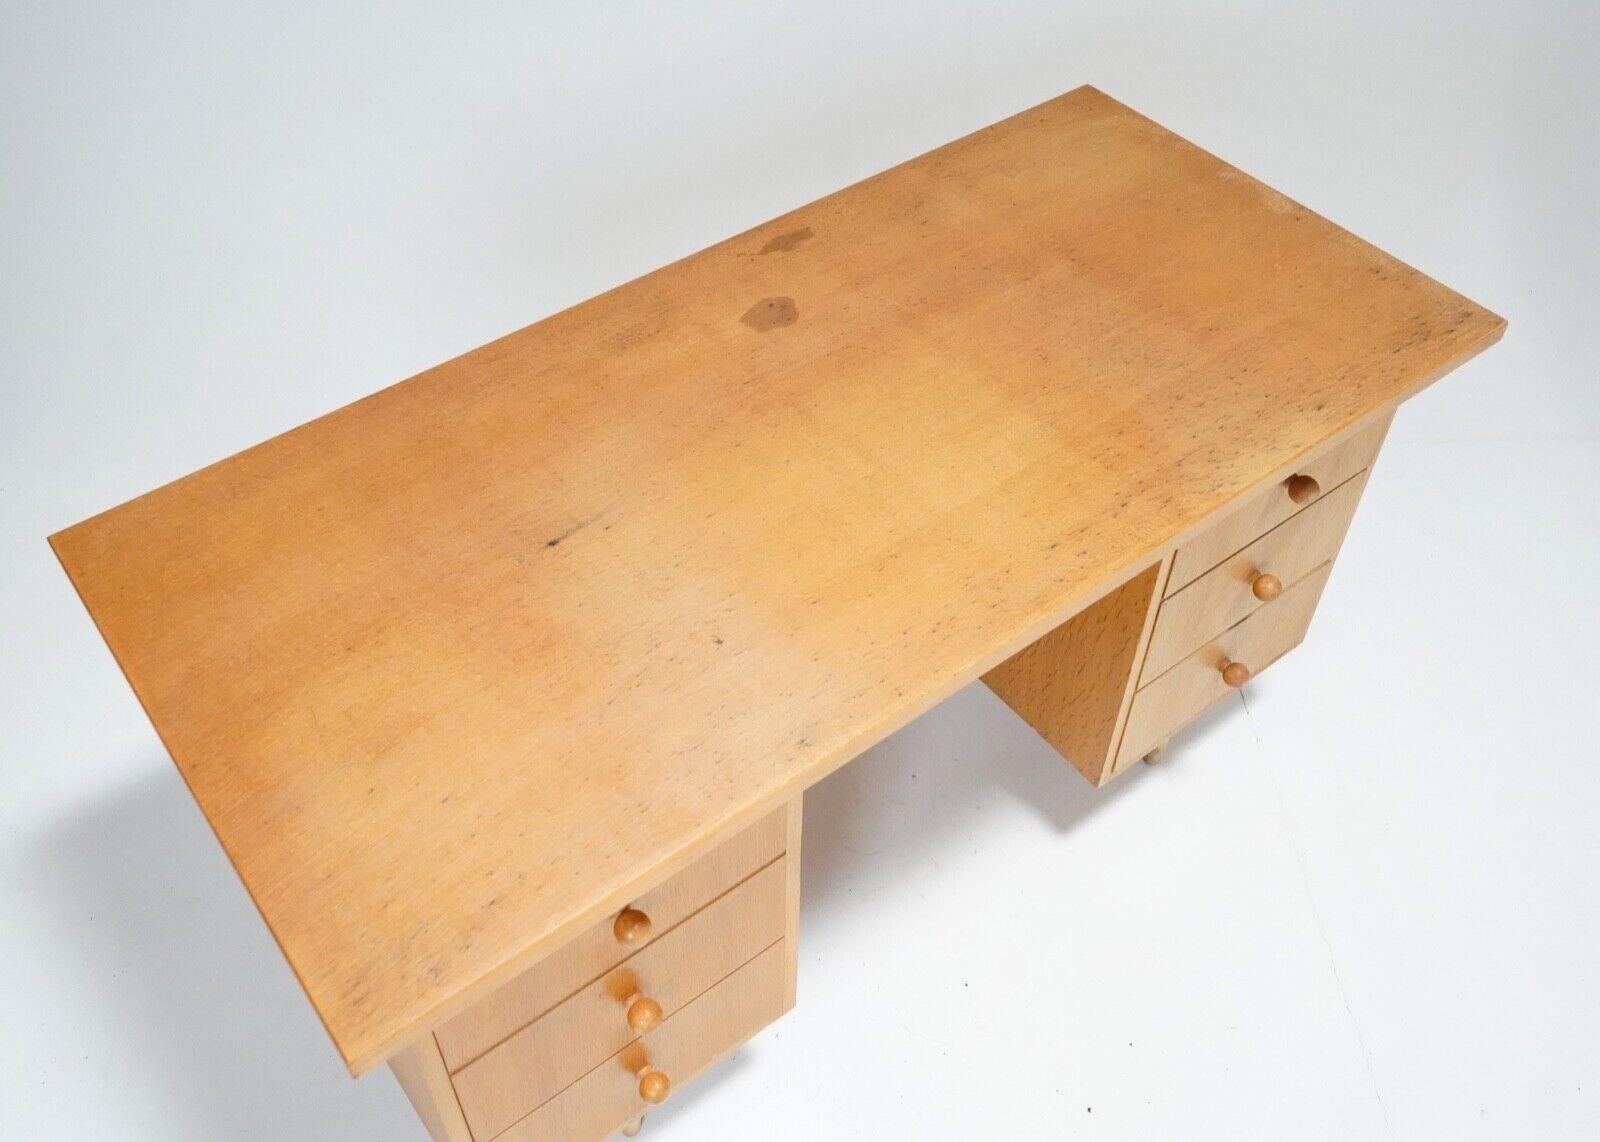 A Mid Century Light Oak veneer desk by British furniture maker Meredew.
This simple desk has six drawers with lovely little spherical pulls. 
Ample storage and a good size surface to work on. 
A few stains on the top and a few chips to the veneer,